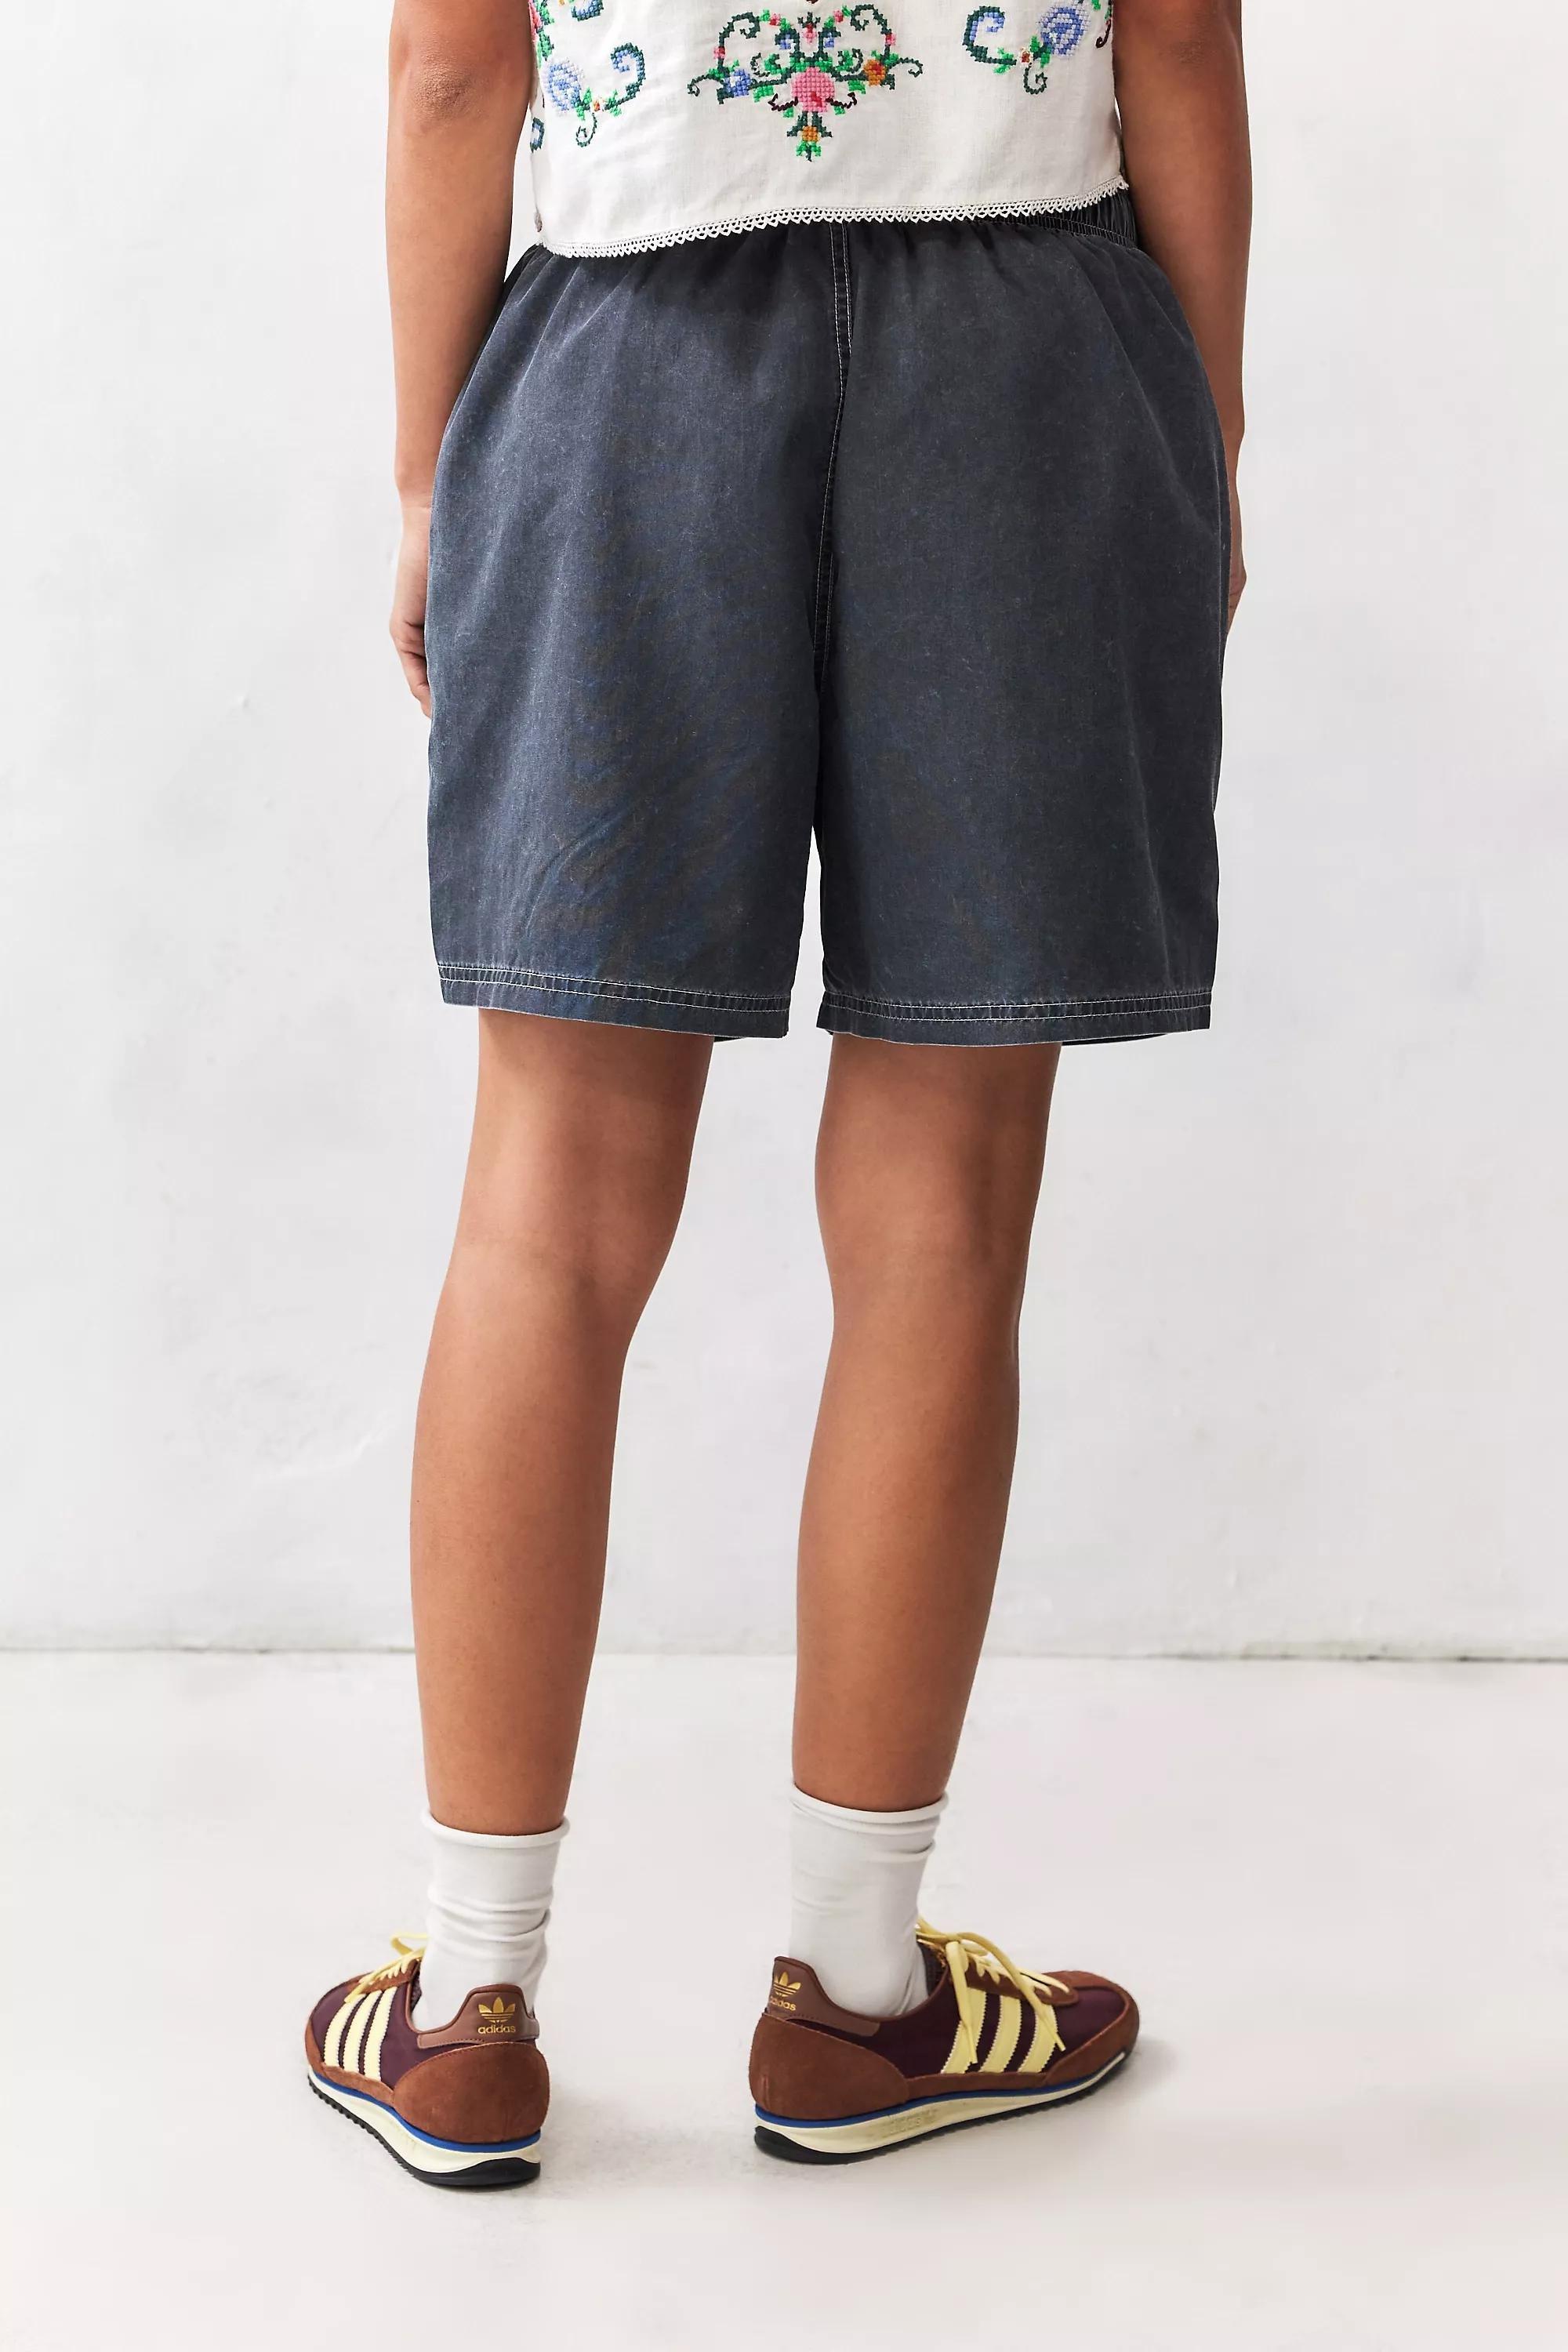 Urban Outfitters - Black Bdg Washed Star Logo Swim Shorts